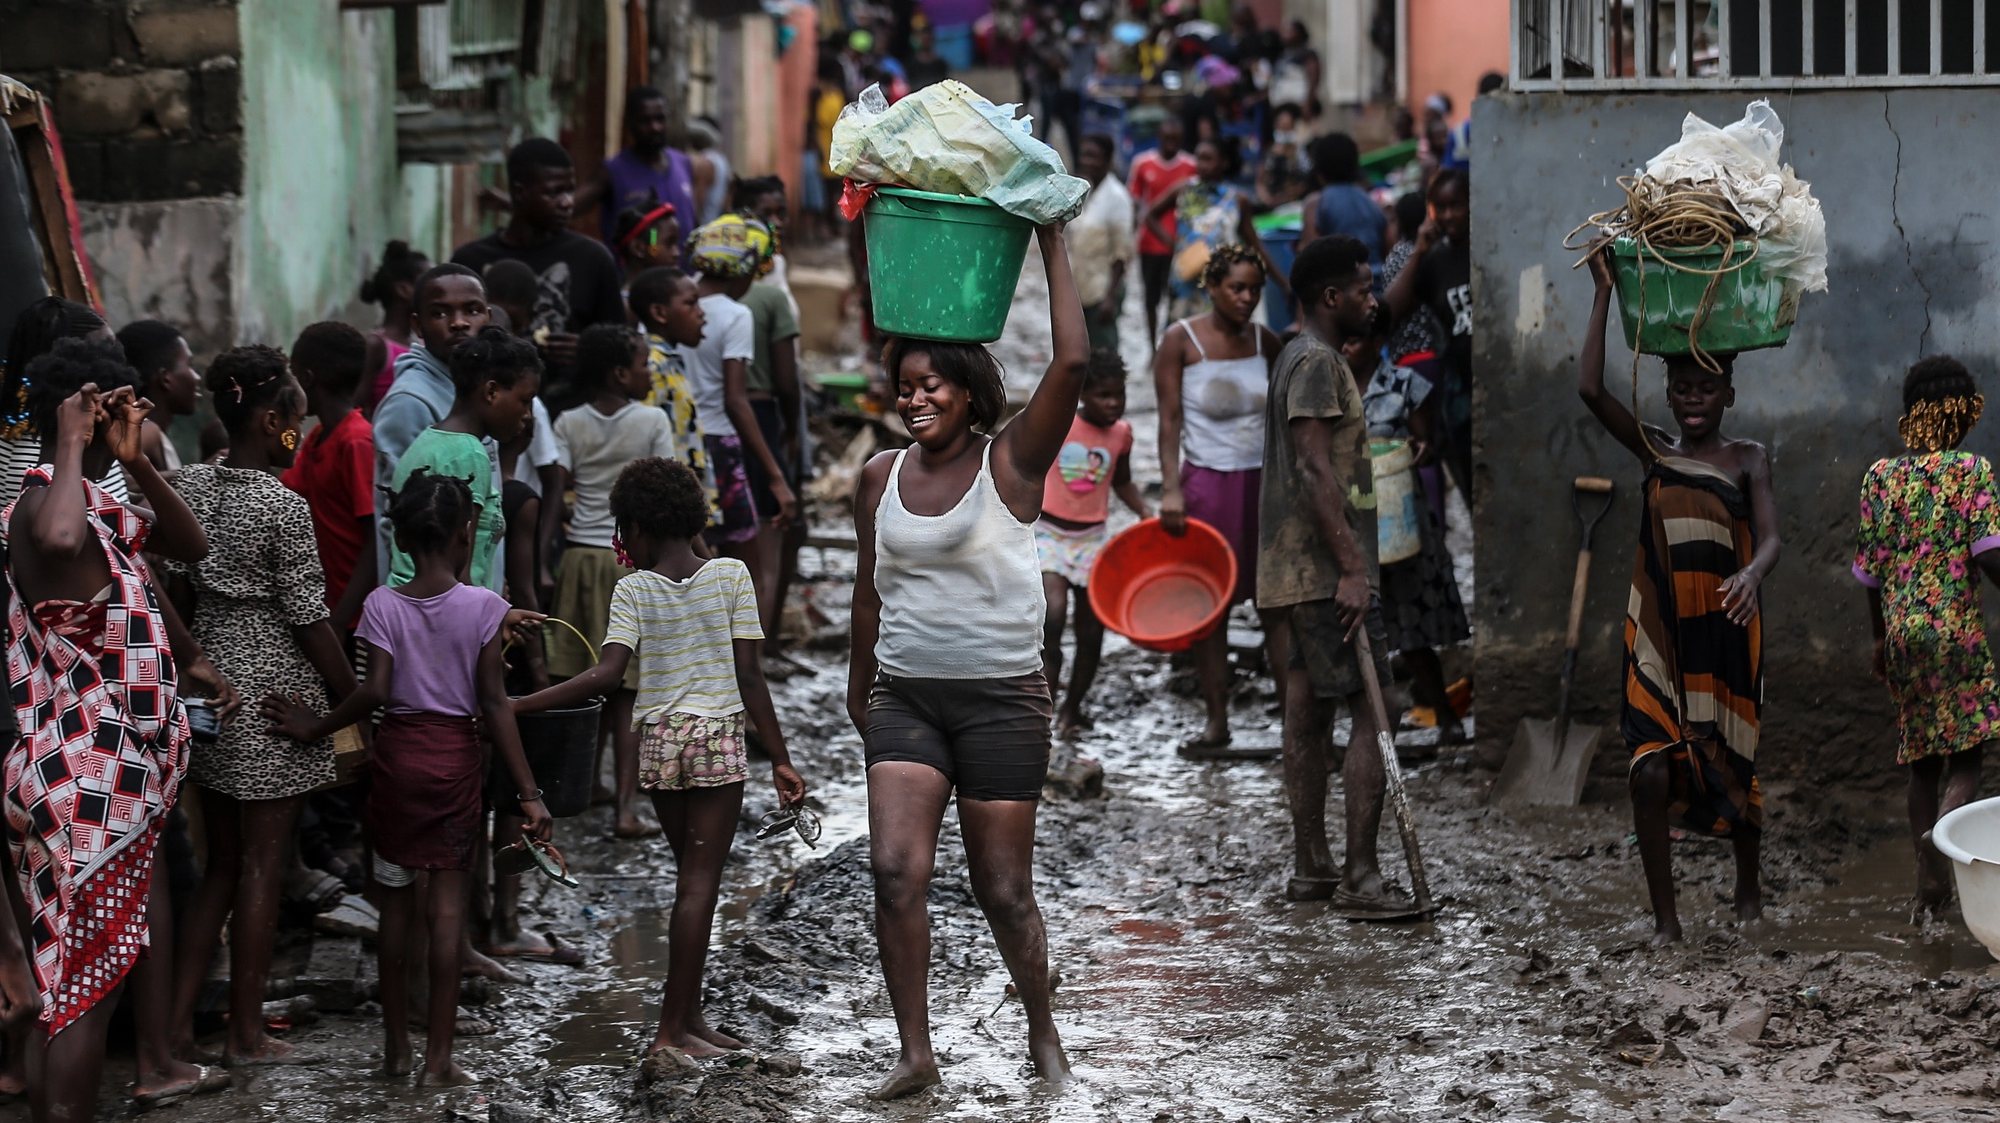 epa09147984 People on a muddy street after heavy rain that fell Monday night in Encide neighborhood, in the Sambizanga district, on the outskirts of Luanda, Angola, 20 April 2021. The torrential rains that hit Luanda on 19 April killed 14 people and left 8,000 displaced, with 16 houses collapsed, 15 trees fell, and a bridge was destroyed, among other damages yet to be calculated.  EPA/AMPE ROGERIO